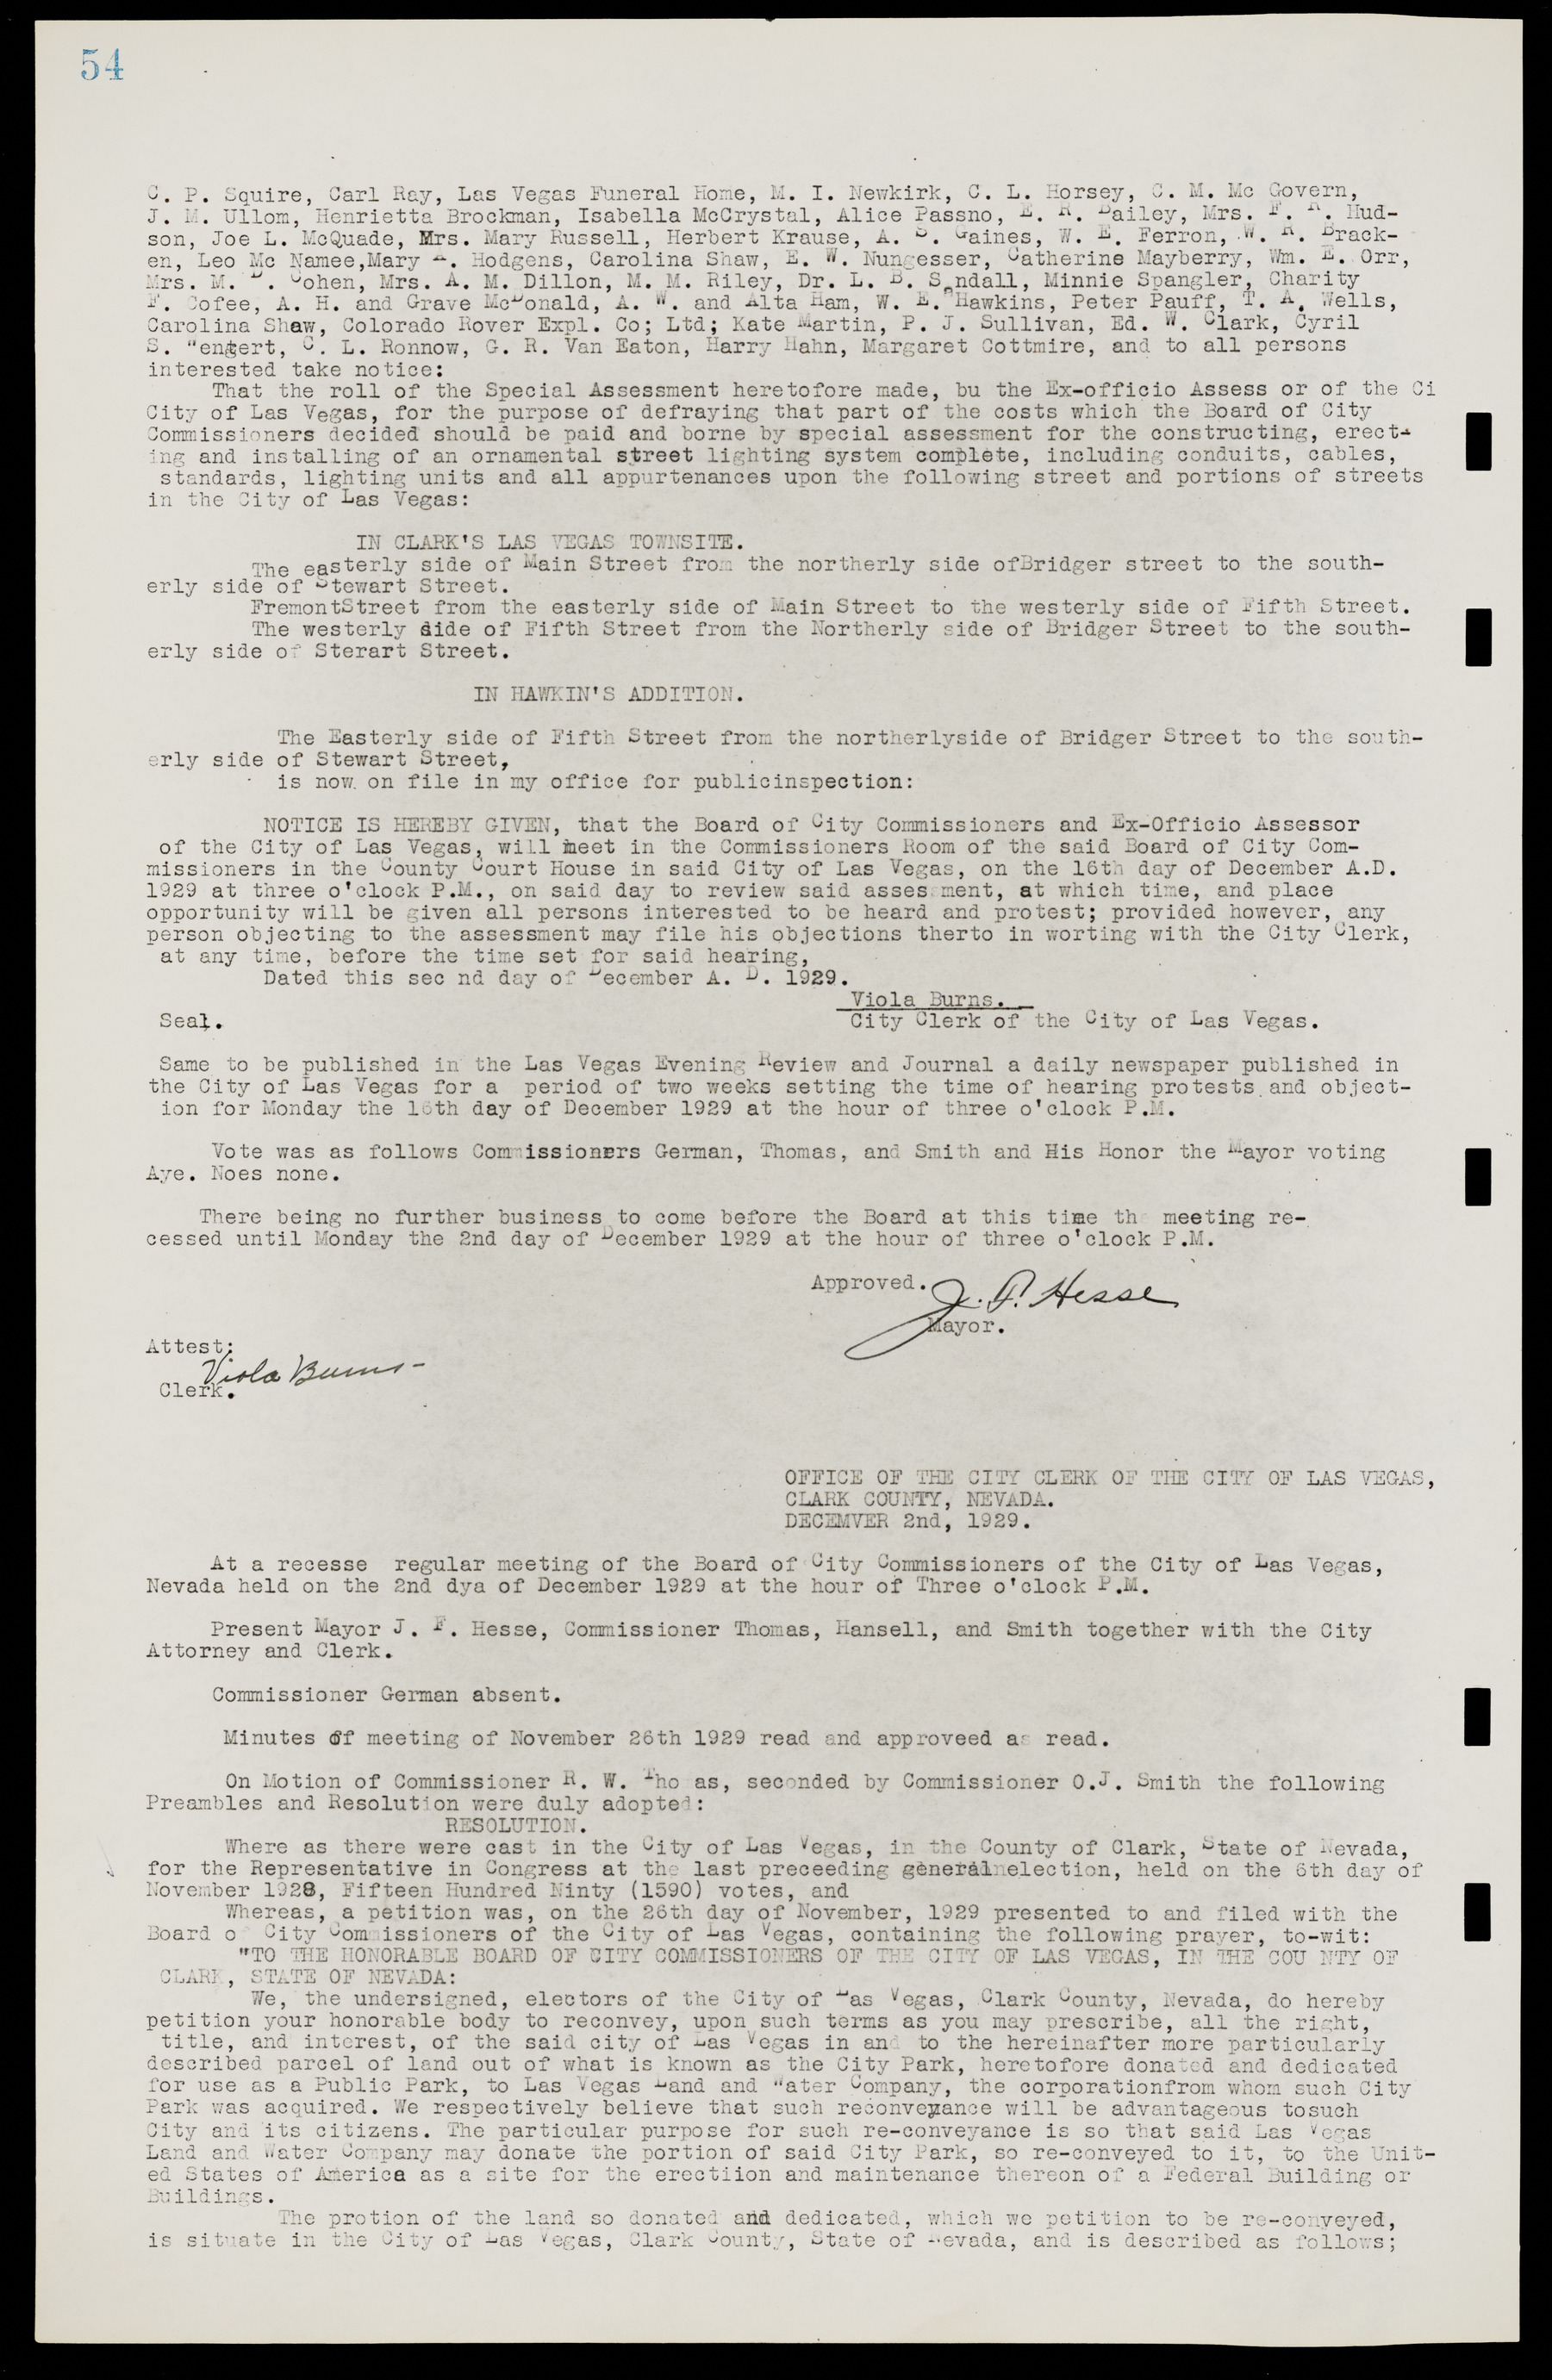 Las Vegas City Commission Minutes, May 14, 1929 to February 11, 1937, lvc000003-60